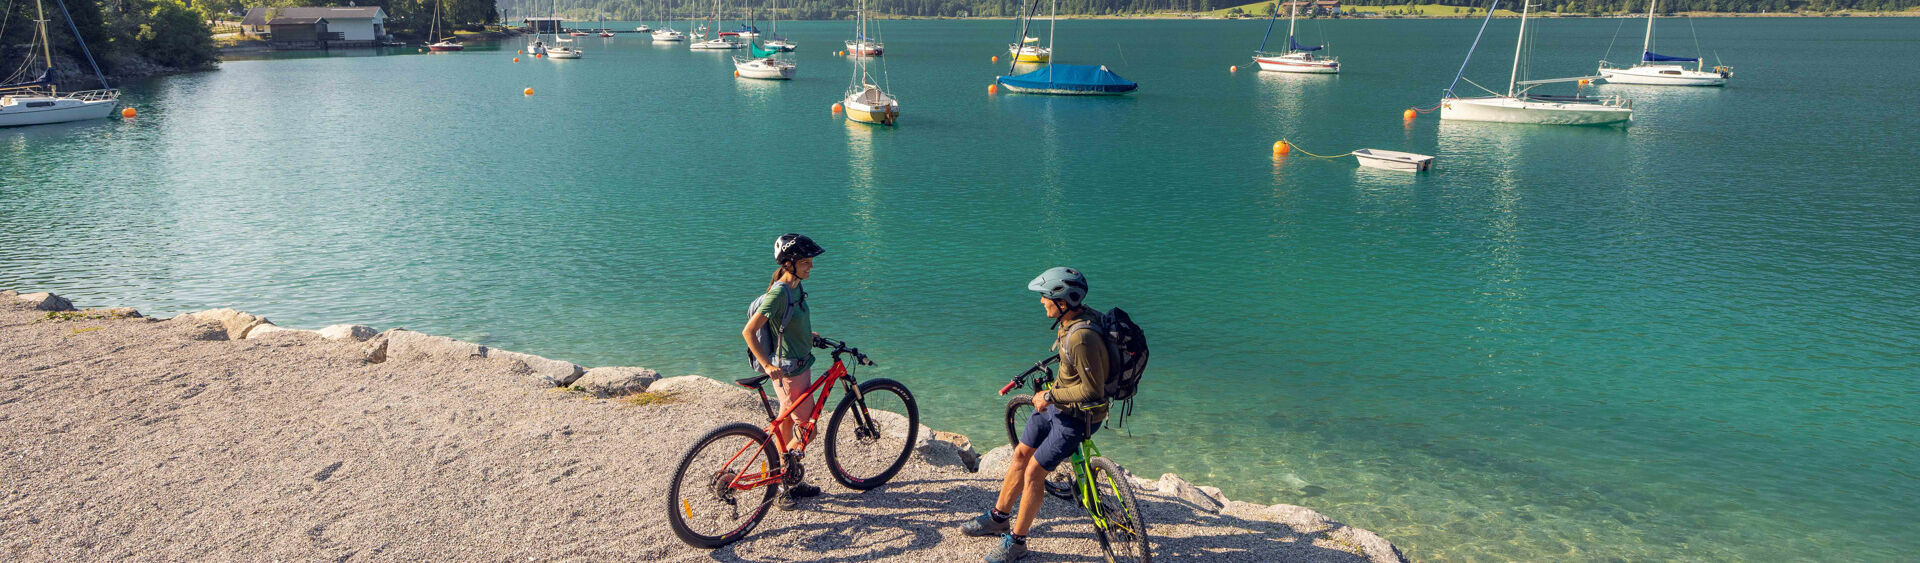 A couple explores the lakeshore in Maurach am Achensee by bike.